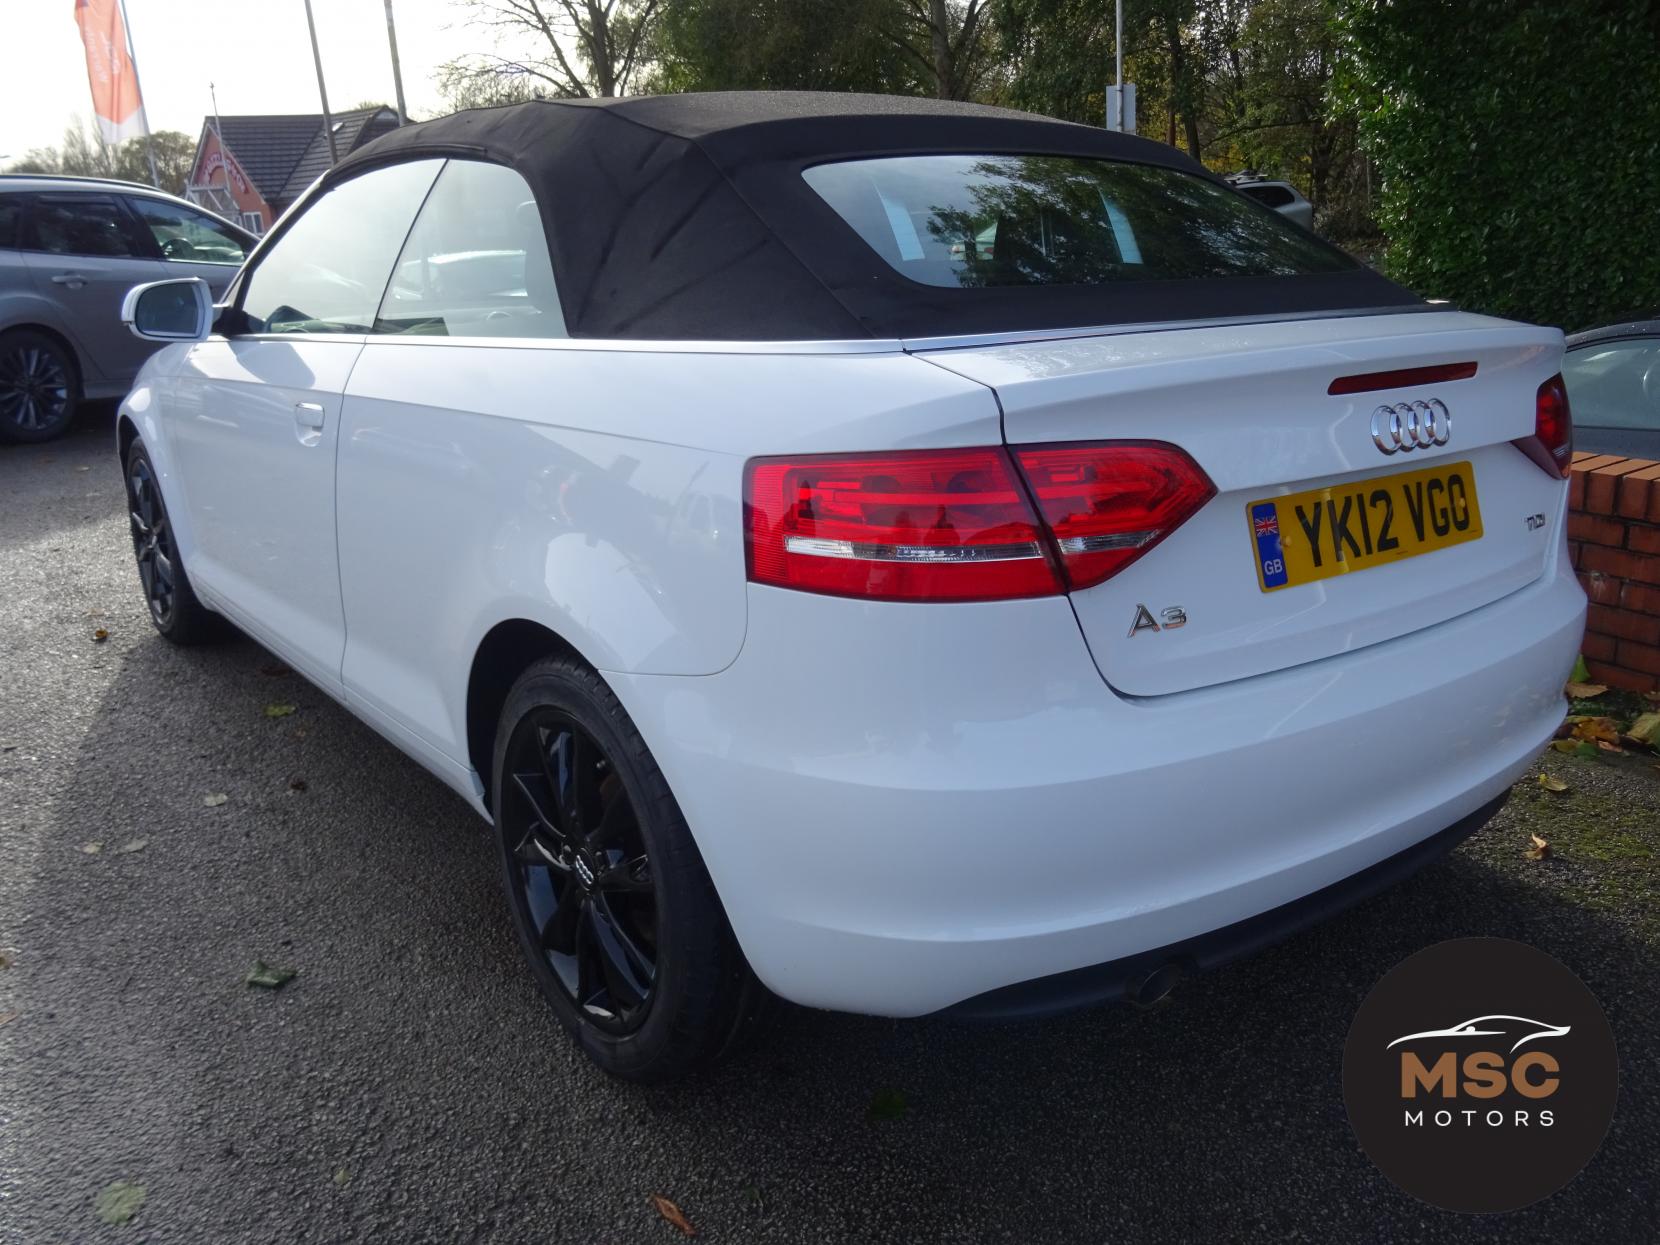 Audi A3 Cabriolet 1.6 TDI Sport Convertible 2dr Diesel Manual Euro 5 (s/s) (105 ps)